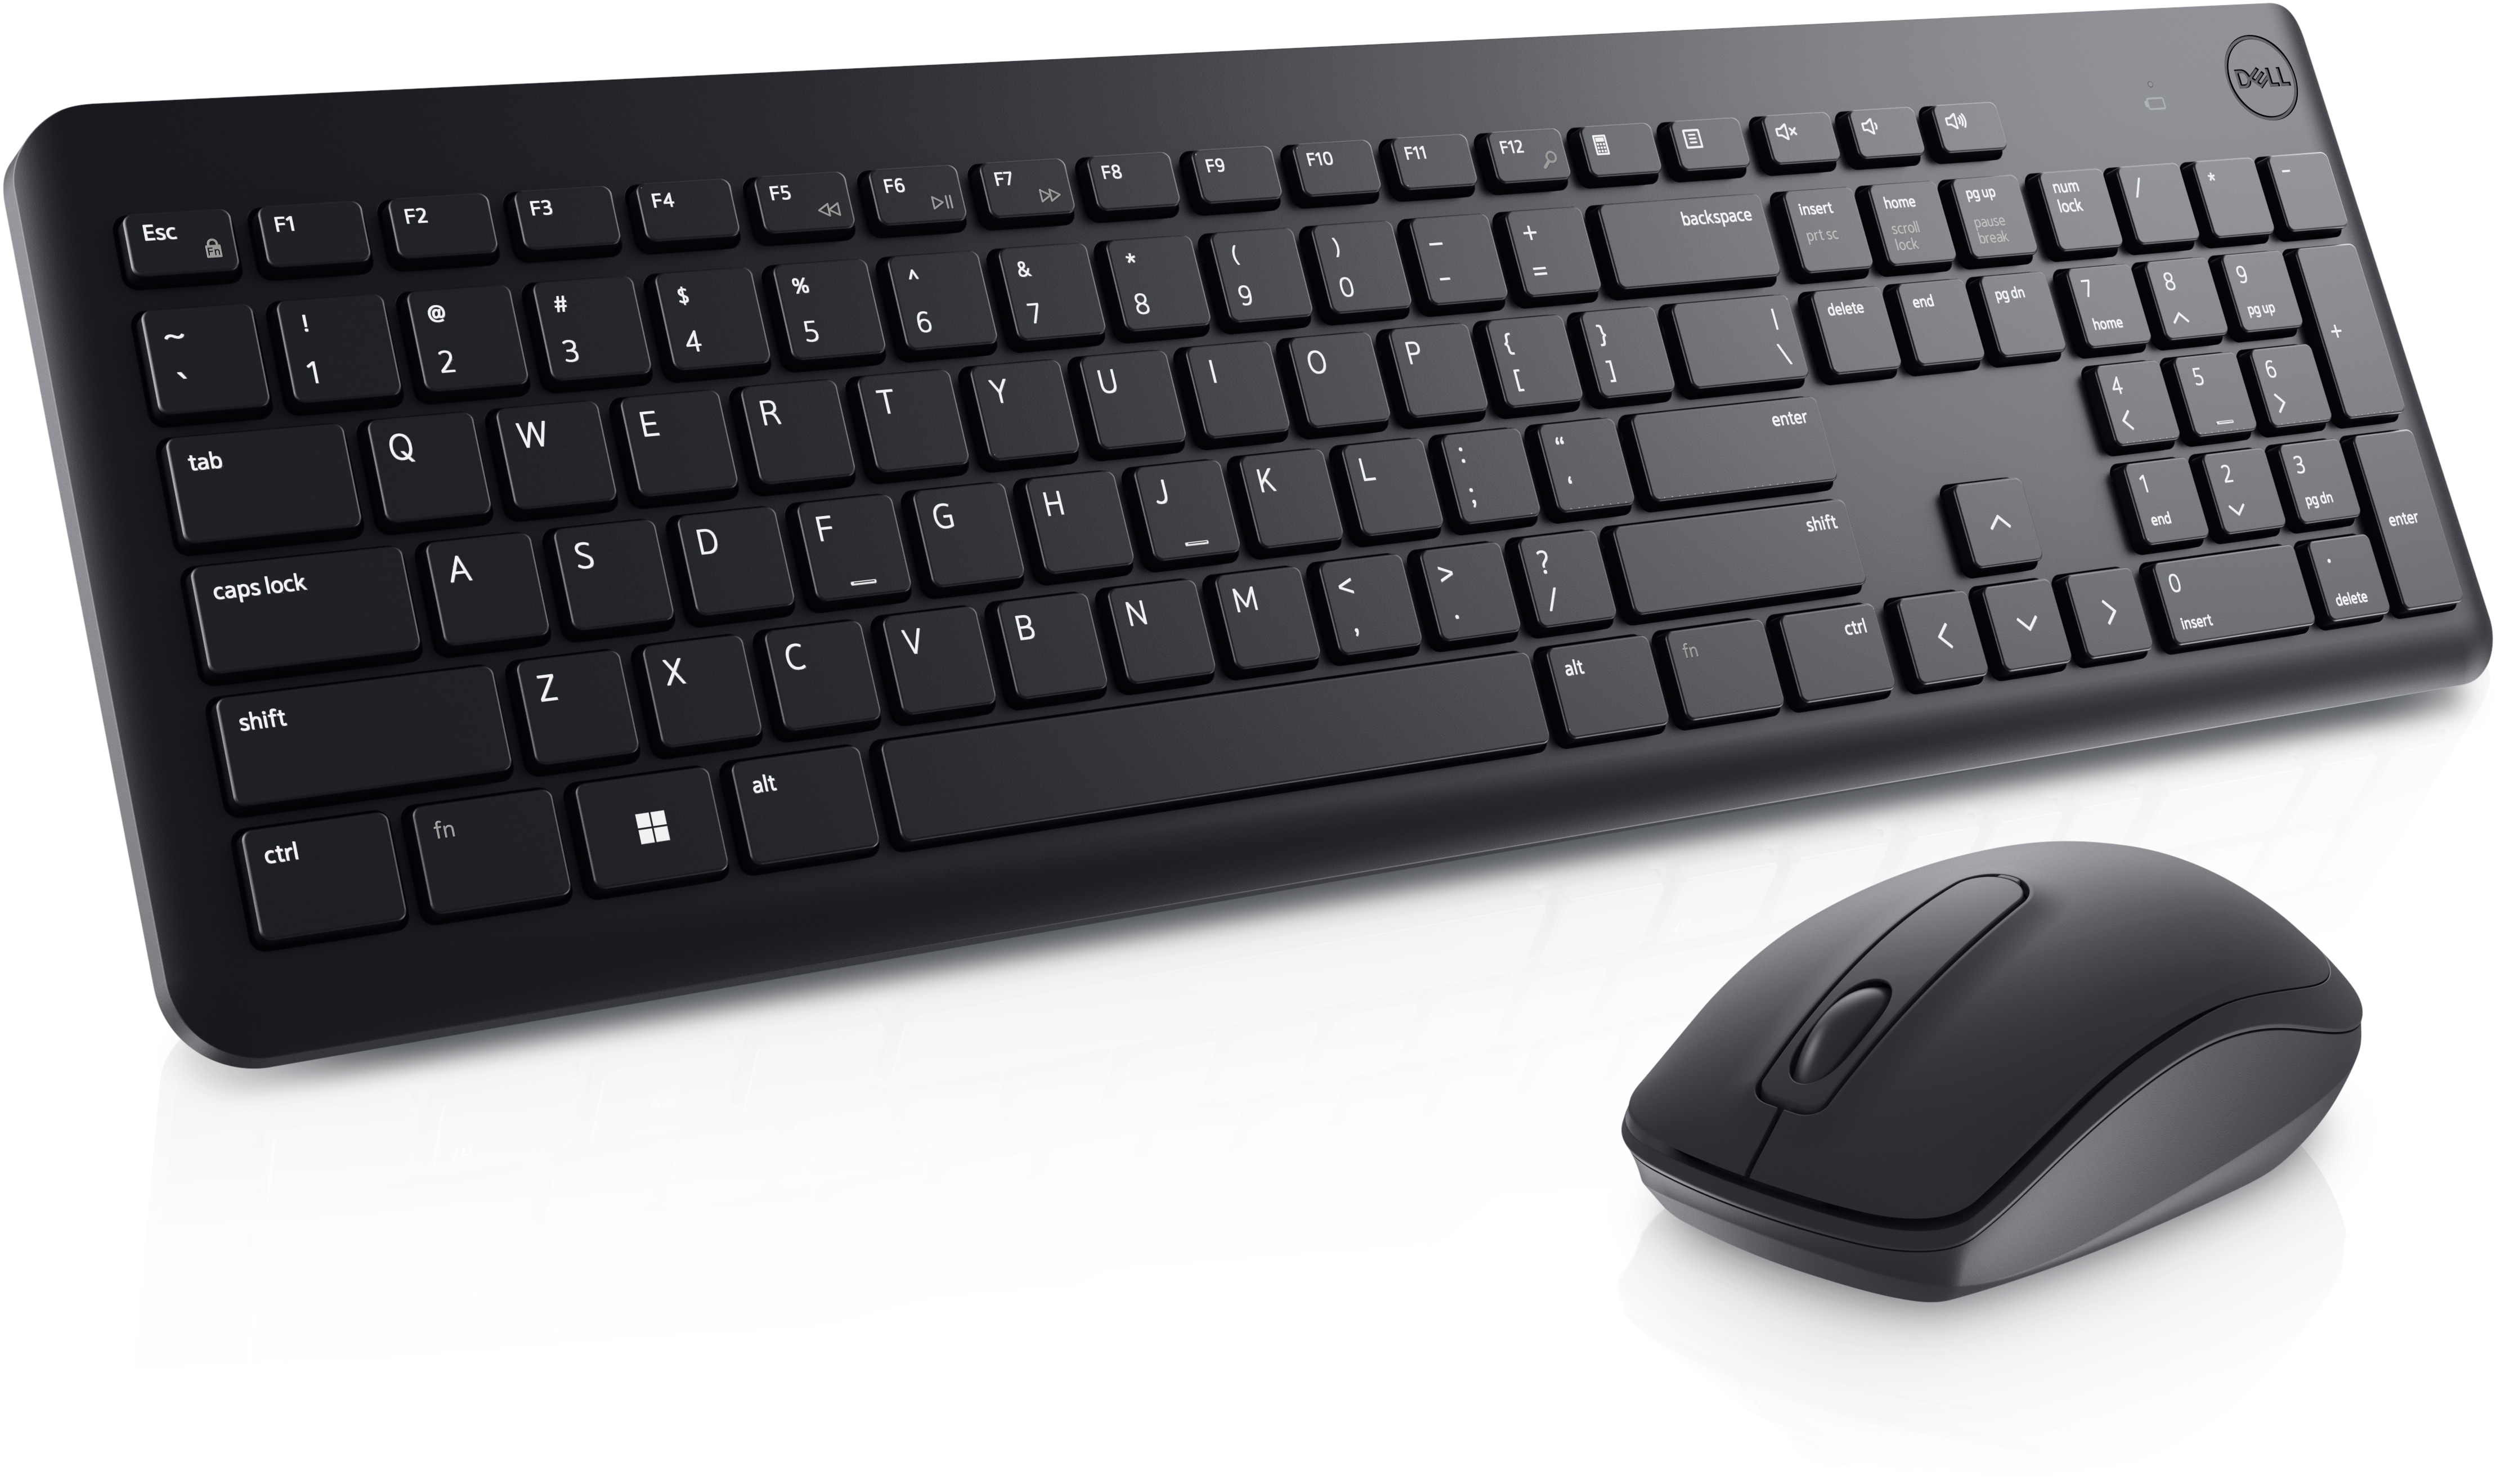 https://i.dell.com/is/image/DellContent/content/dam/ss2/product-images/peripherals/input-devices/dell/keyboards/km3322w/media-gallery/keyboard-mouse-km3322w-gallery-1.psd?fmt=pjpg&pscan=auto&scl=1&wid=4435&hei=2637&qlt=100,1&resMode=sharp2&size=4435,2637&chrss=full&imwidth=5000